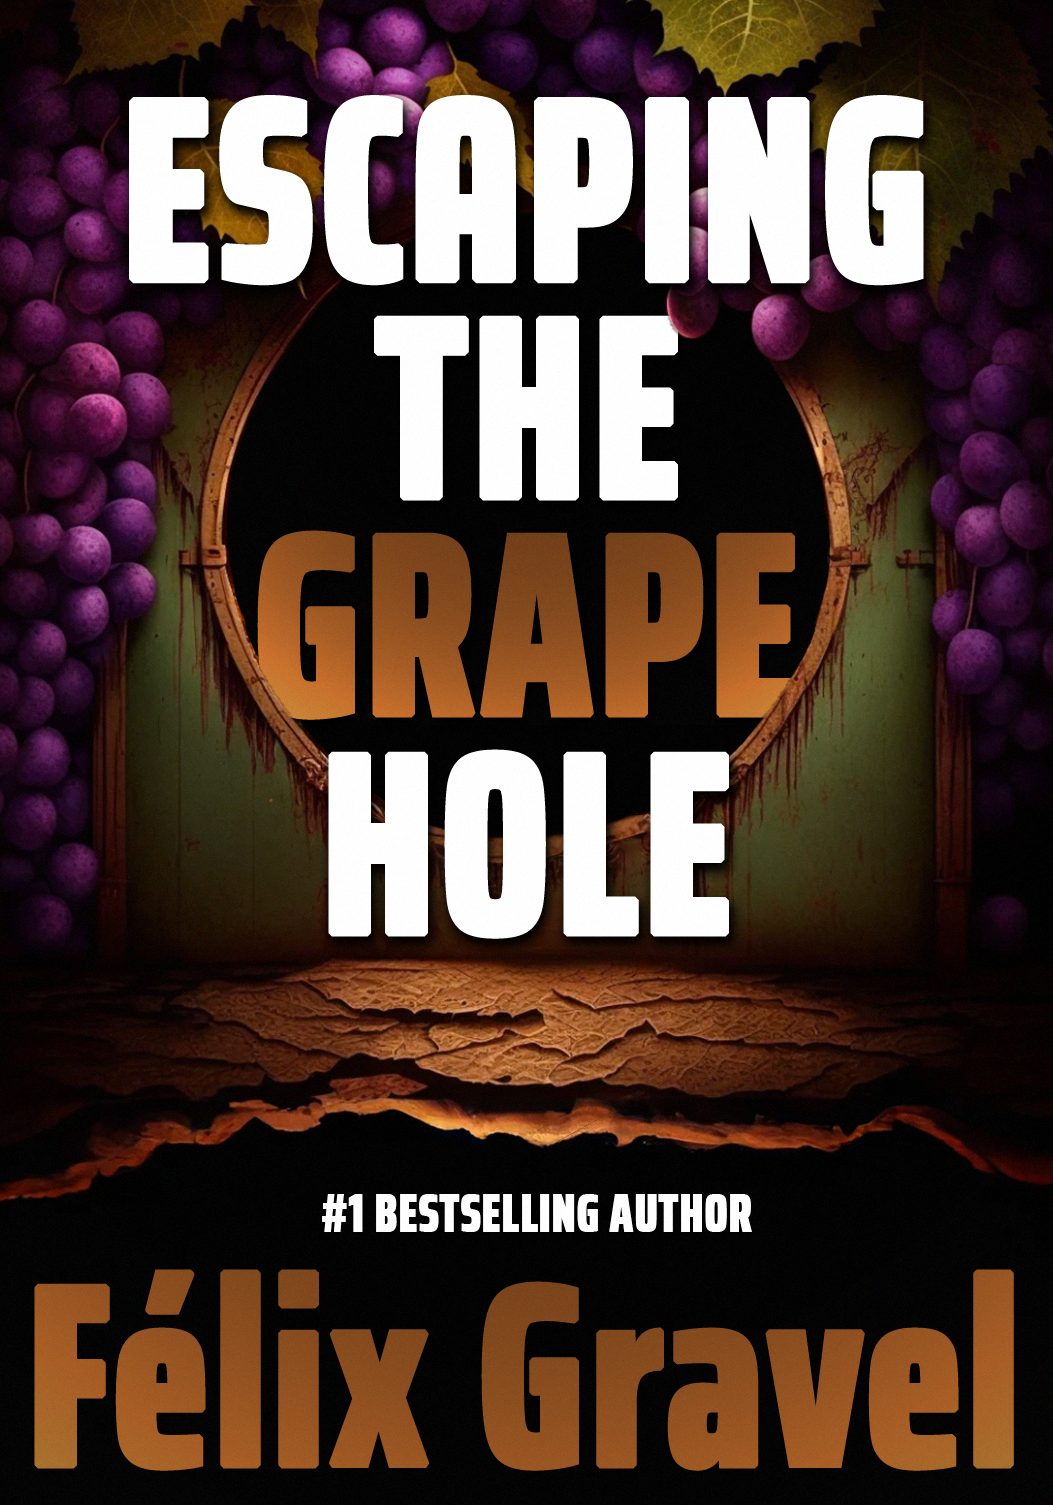 Escaping the grape hole